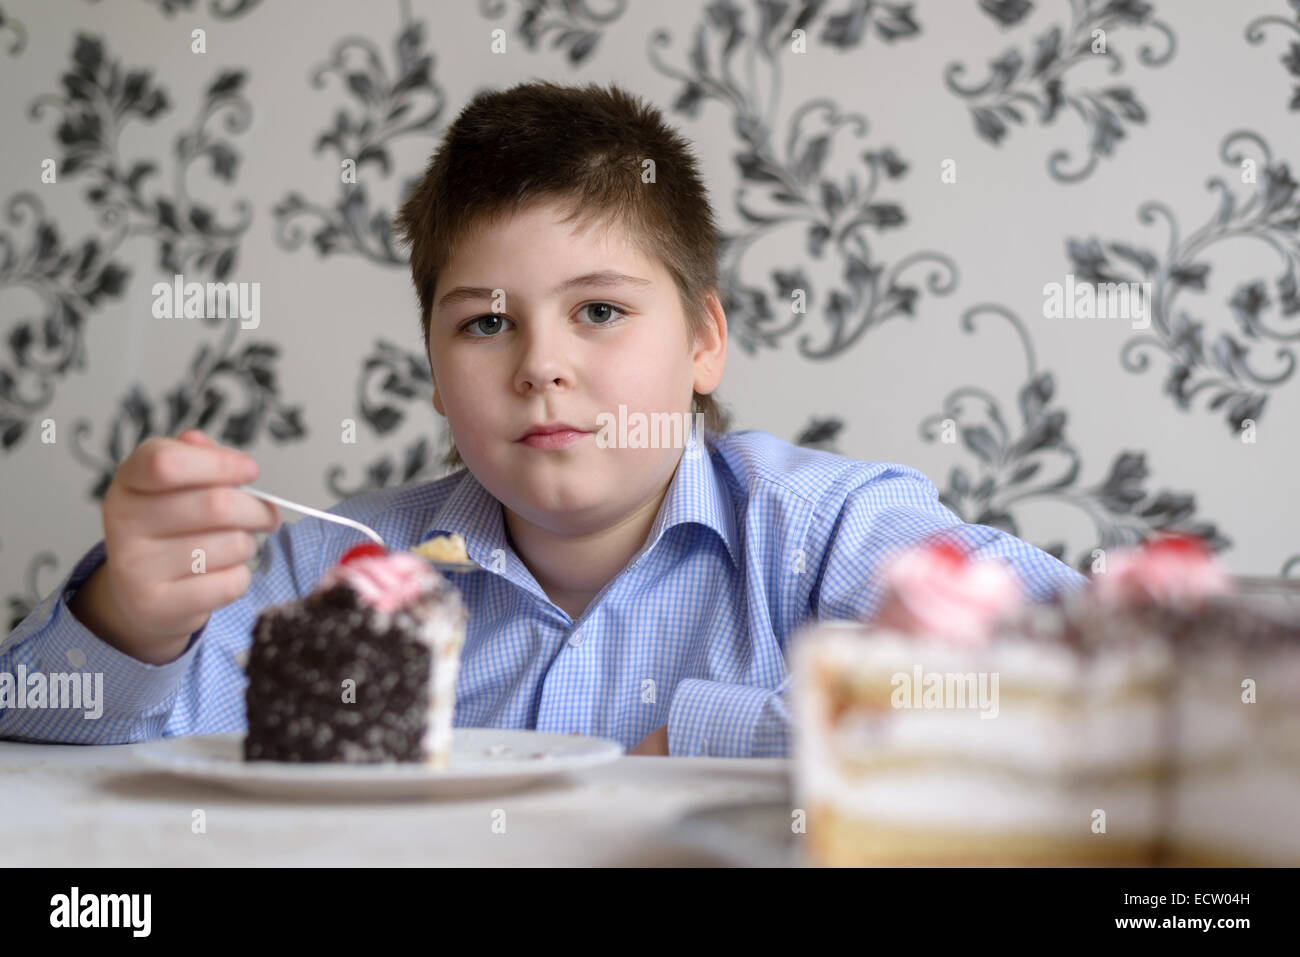 Boy eating cake at table Stock Photo - Alamy